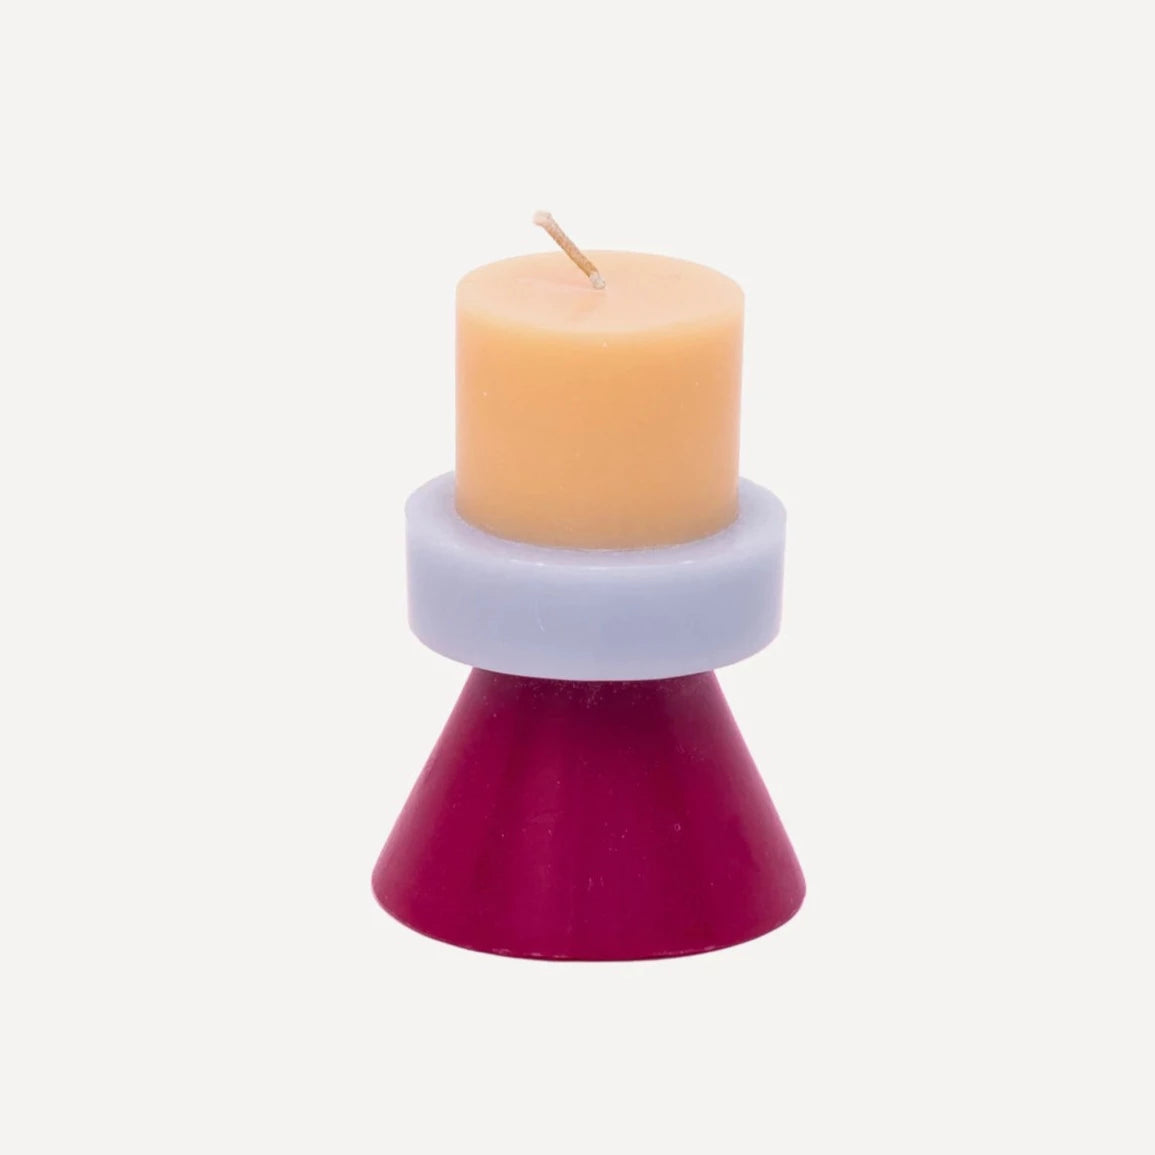 YOD AND CO - Stack Candle Mini - Fersken, Syrin & Rubin - COLORPOP